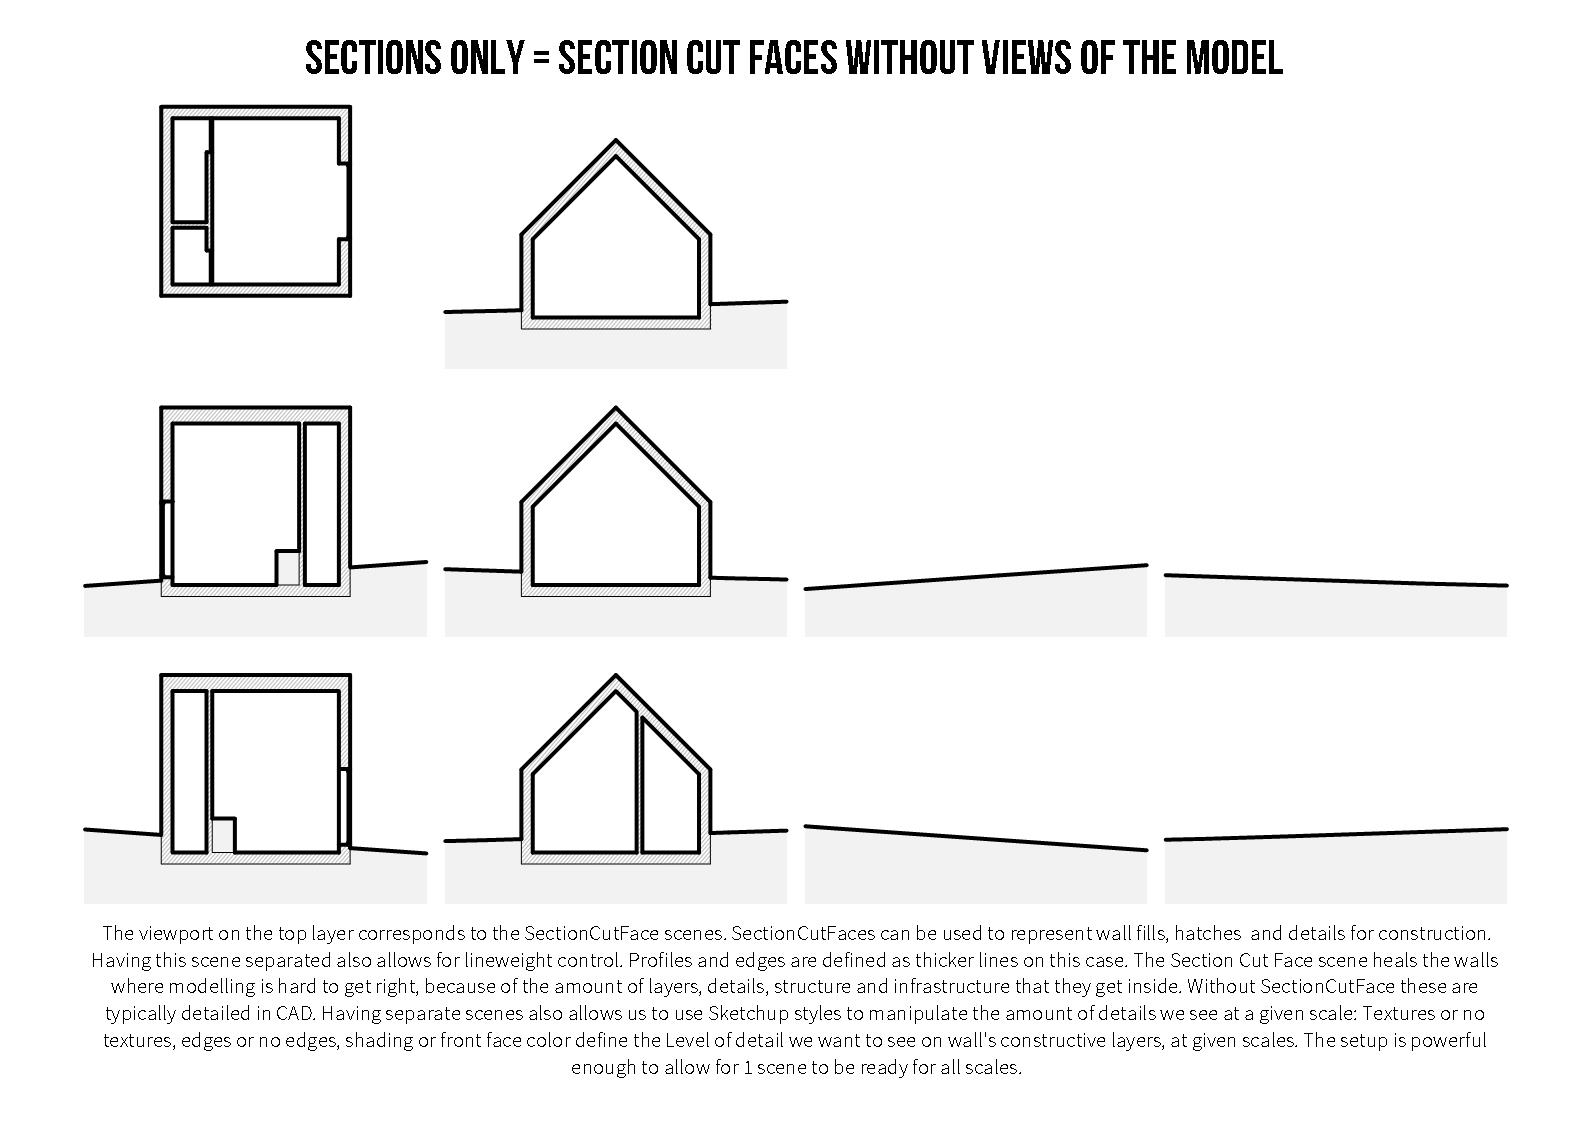 Simple Architectural Layout - DWG Based 2013_5.jpg